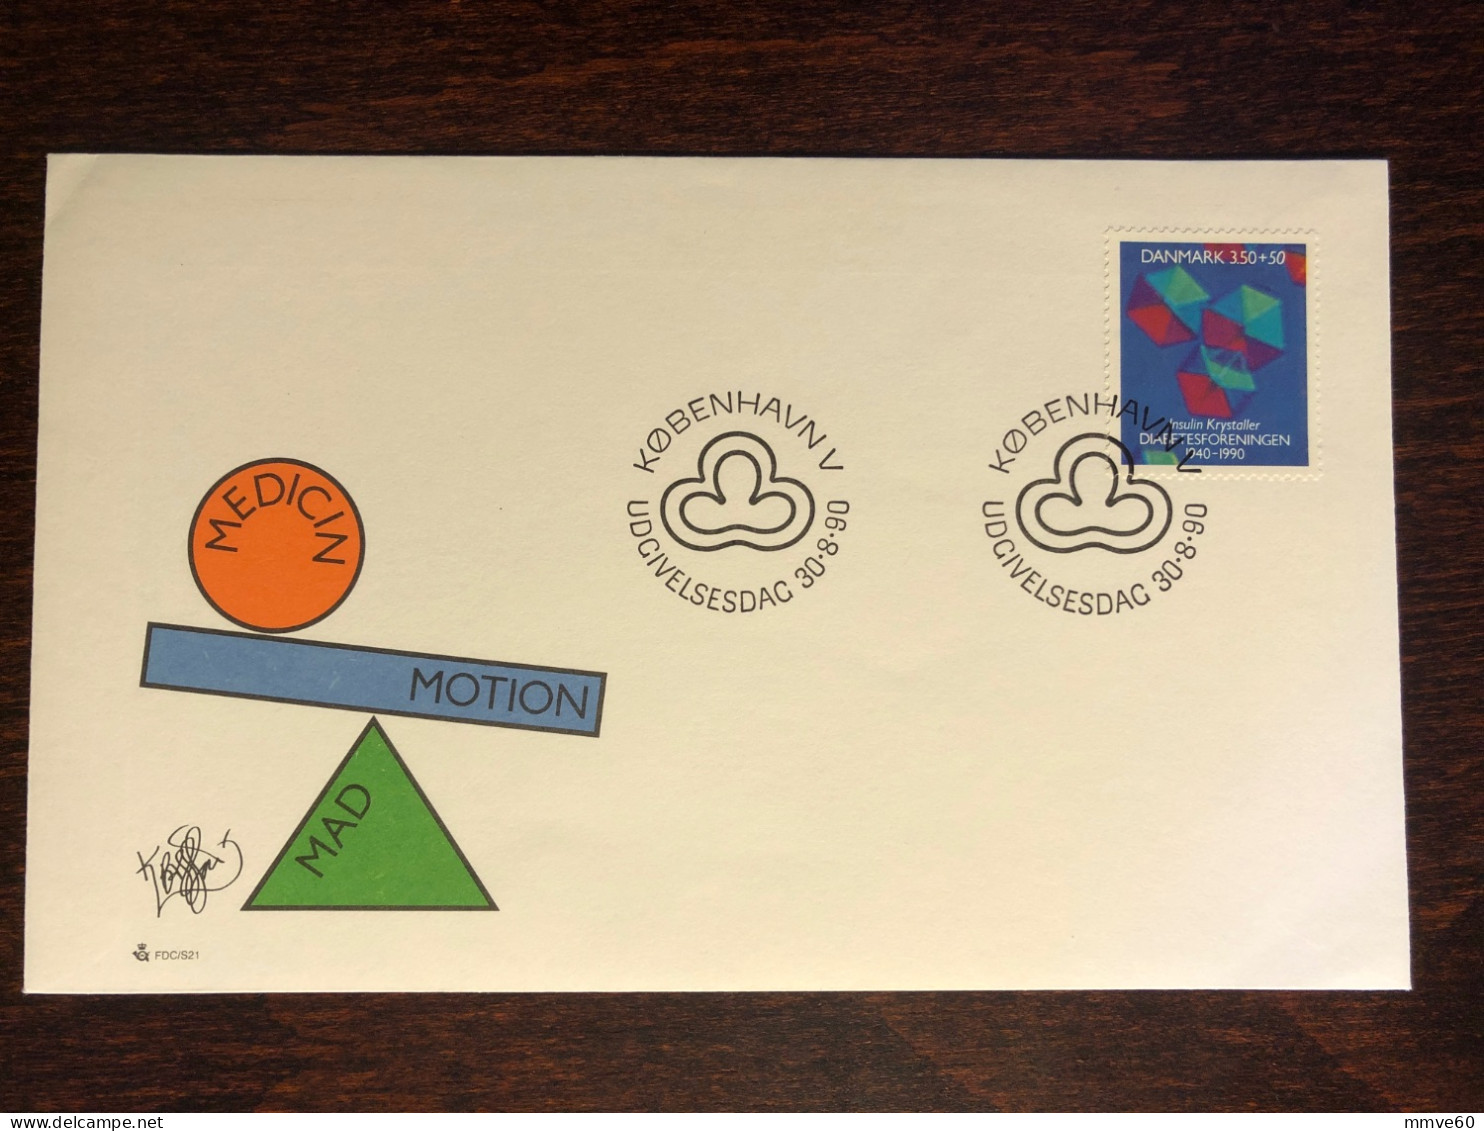 DENMARK FDC COVER 1990 YEAR DIABETES INSULIN HEALTH MEDICINE STAMPS - FDC